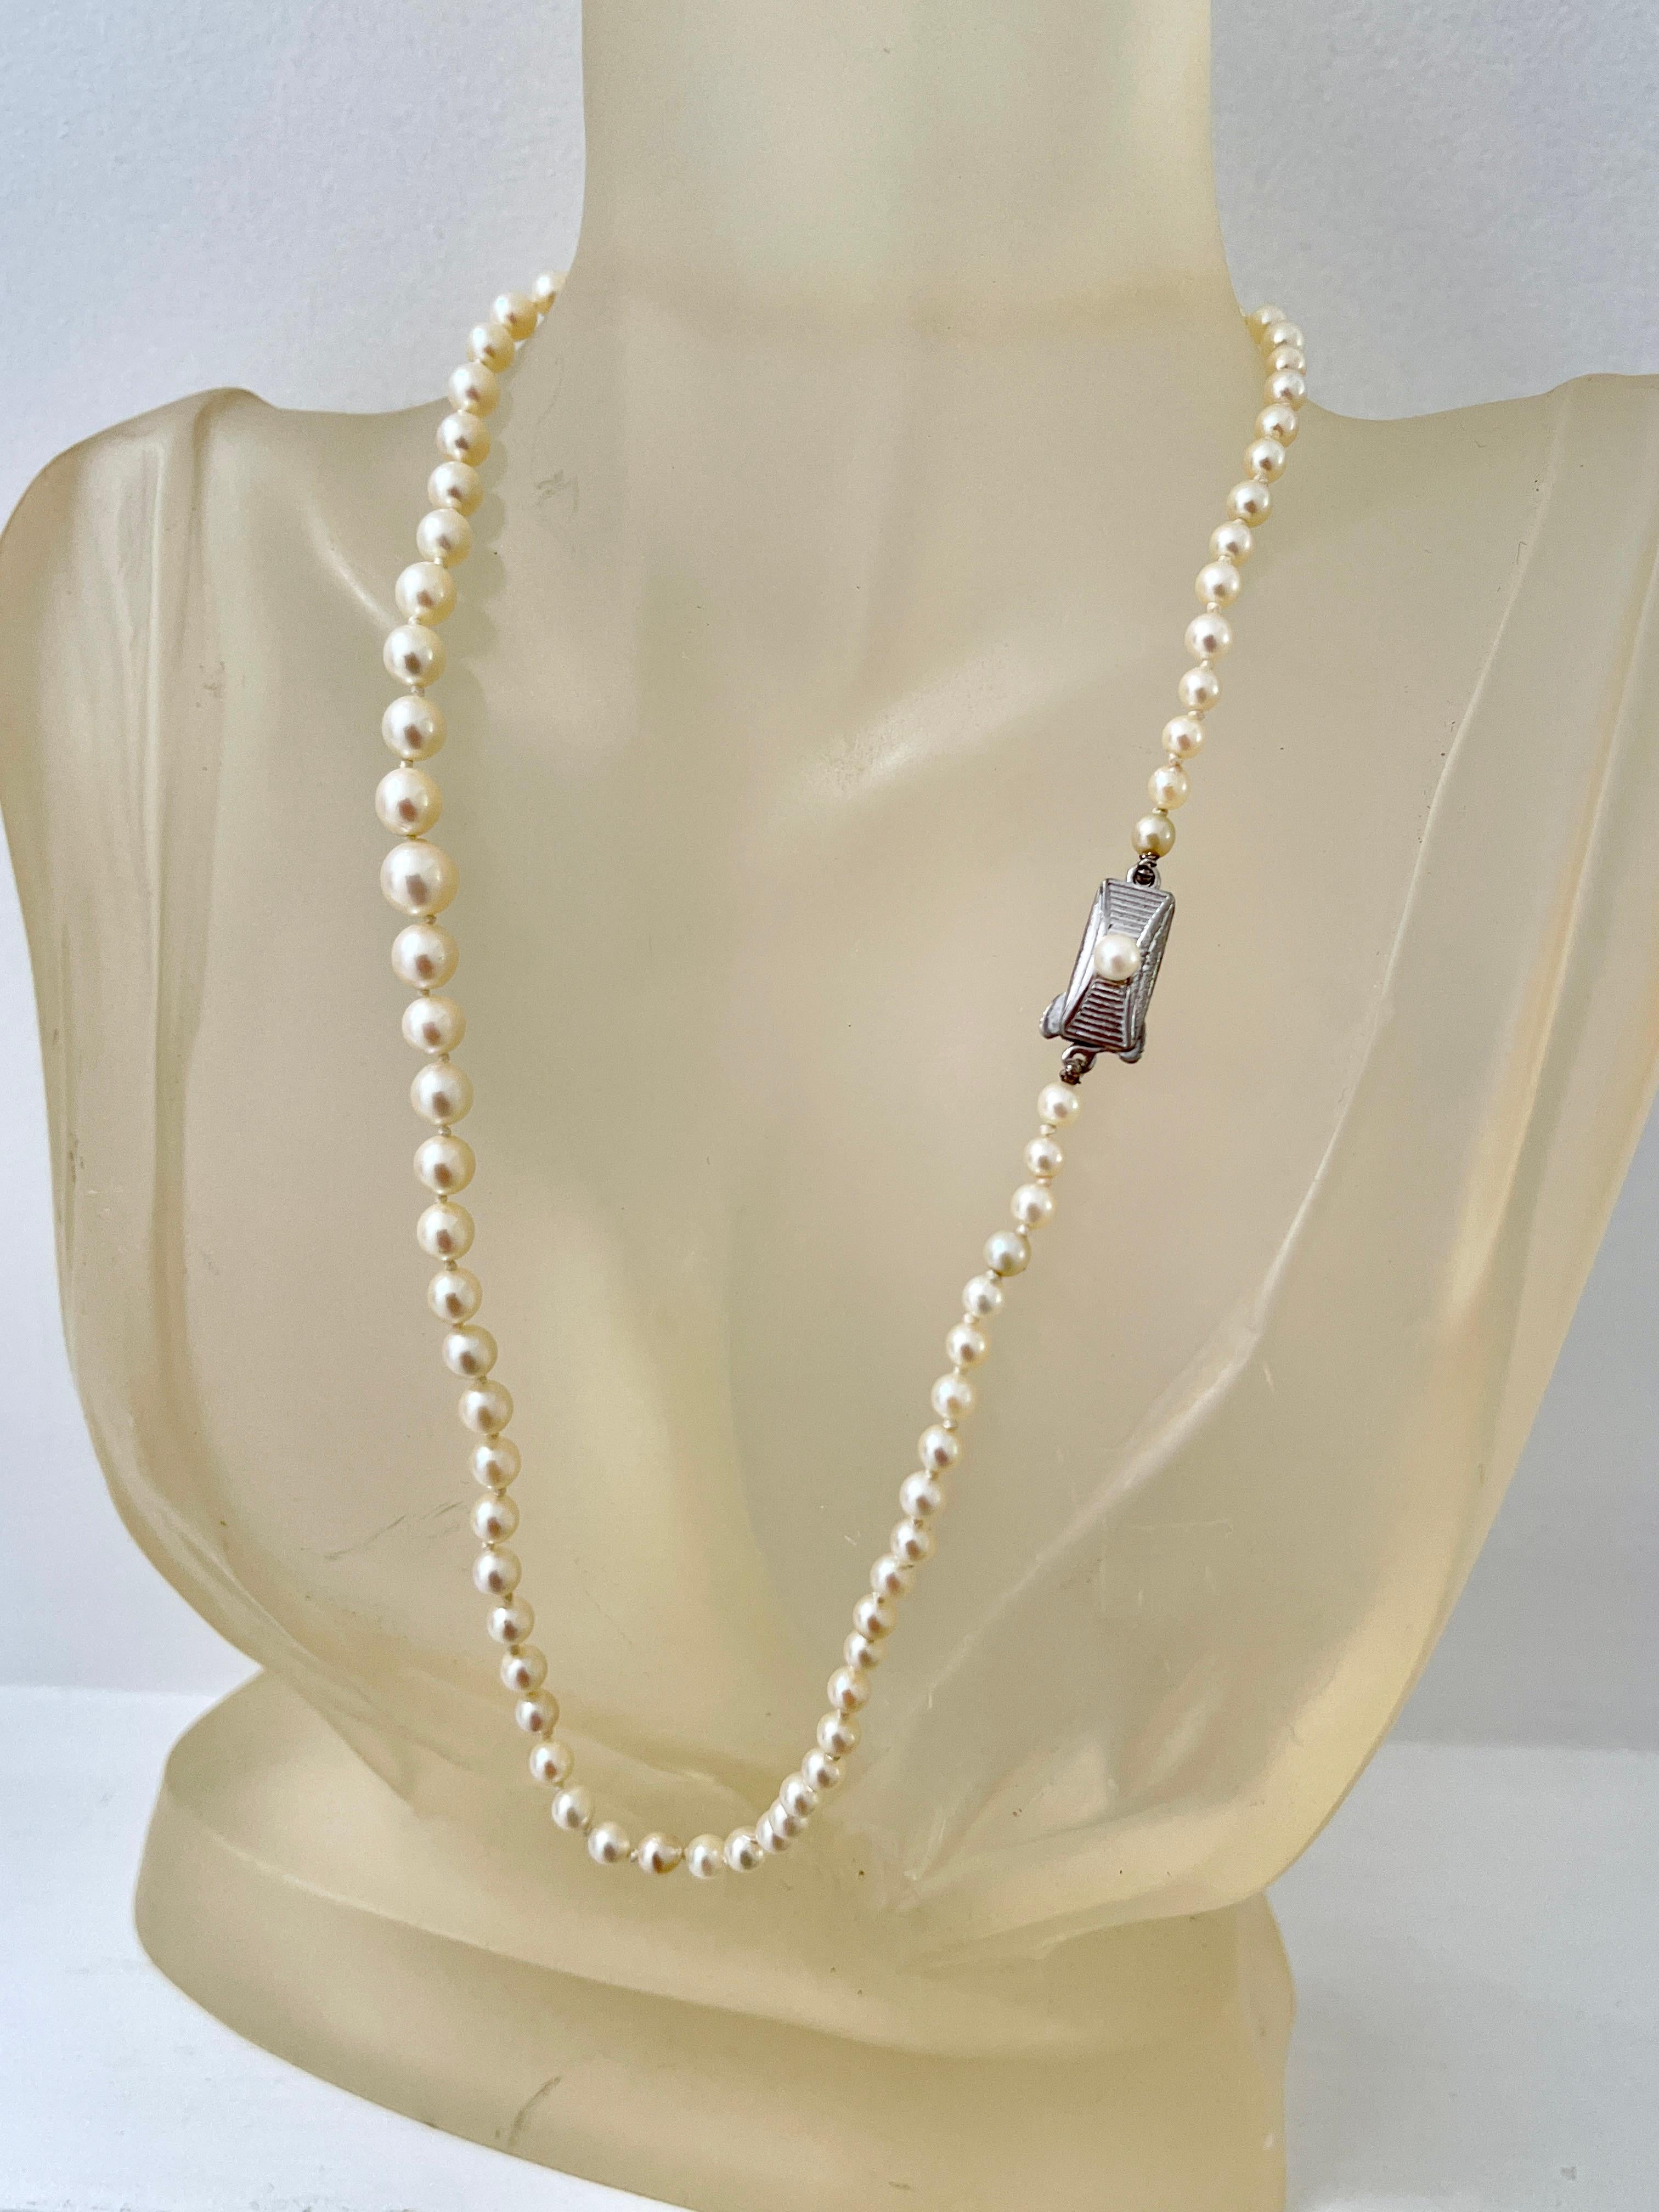 Vintage Mikimoto Fine Pearl Strand
Mikimoto are world renowned for their pearl quality and standards.  This vintage necklace is strung with 79 Akoya cultured Pearls that have a creamy-silver lustre.  The pearls are graduated in size measuring